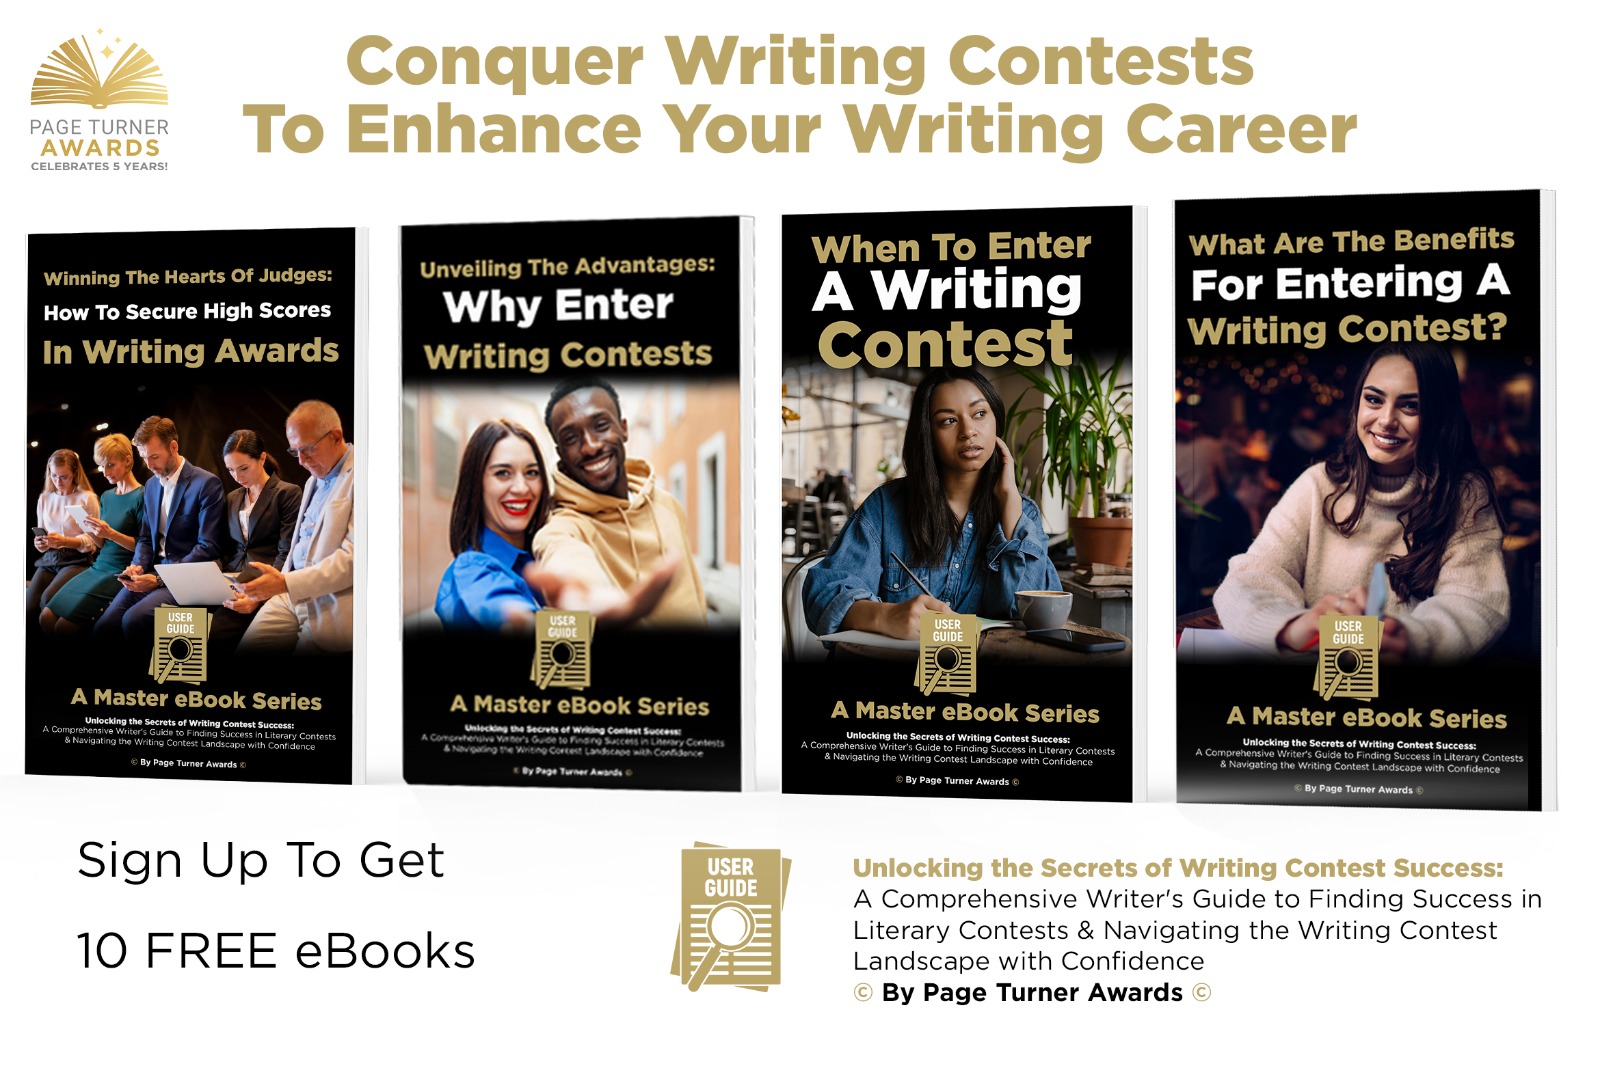 A%20Comprehensive%20Writer_s%20Guide%20to%20Finding%20Success%20in%20Writing%20Contests%20to%20Navigate%20the%20Writing%20Contest%20Landscape%20with%20Confidence(1).jpeg